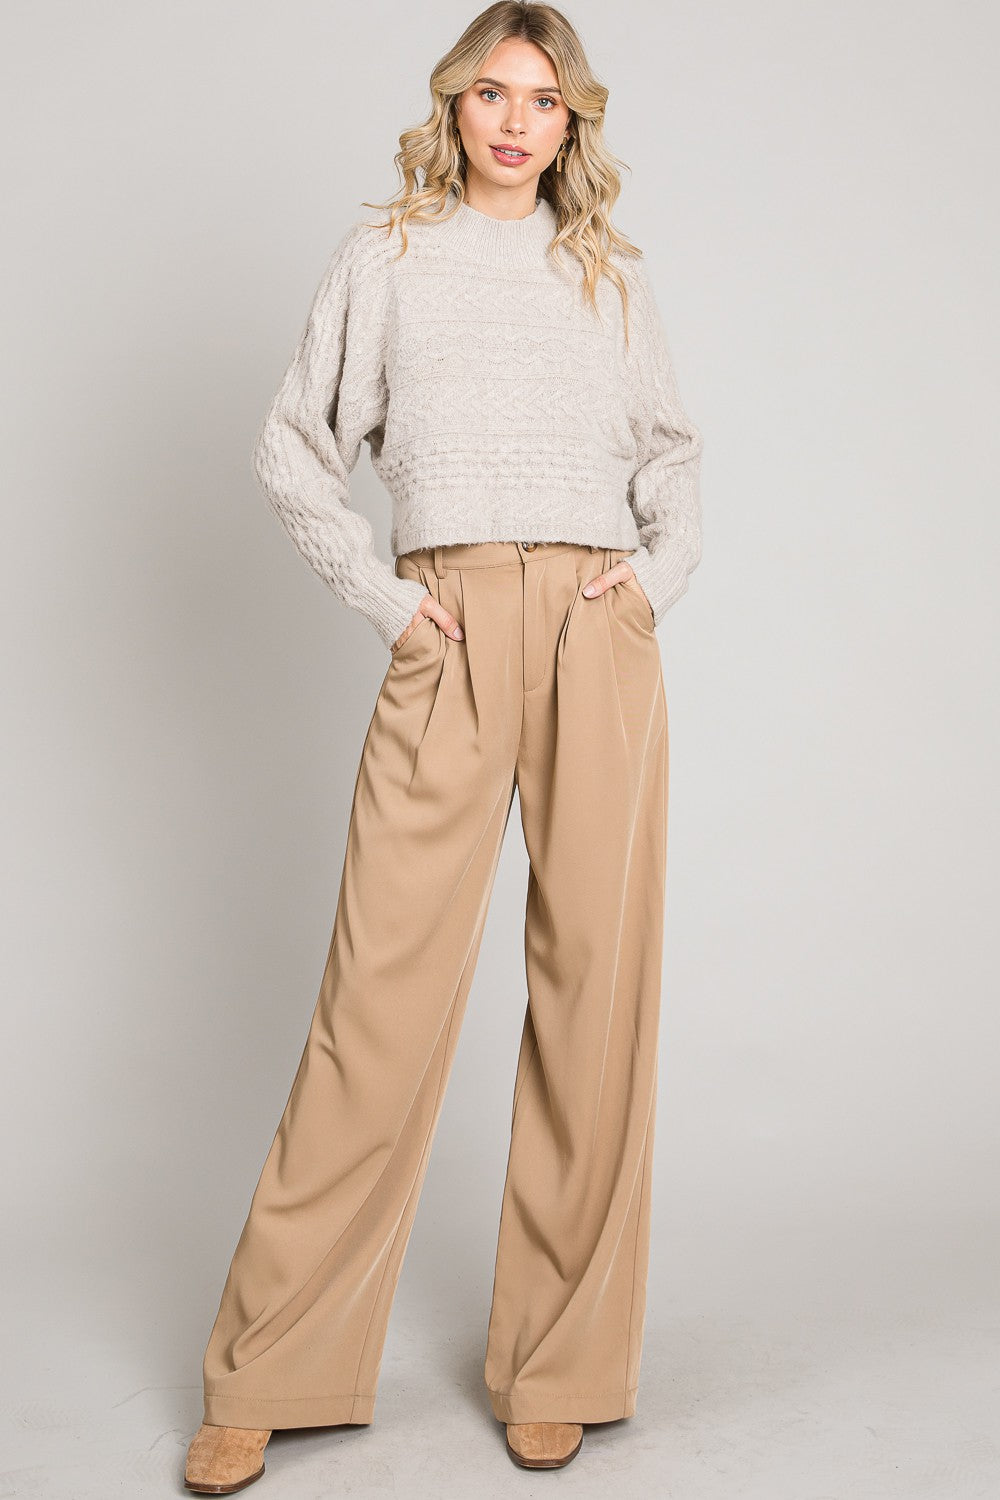 Cable Knit Cropped Sweater | 3 colors